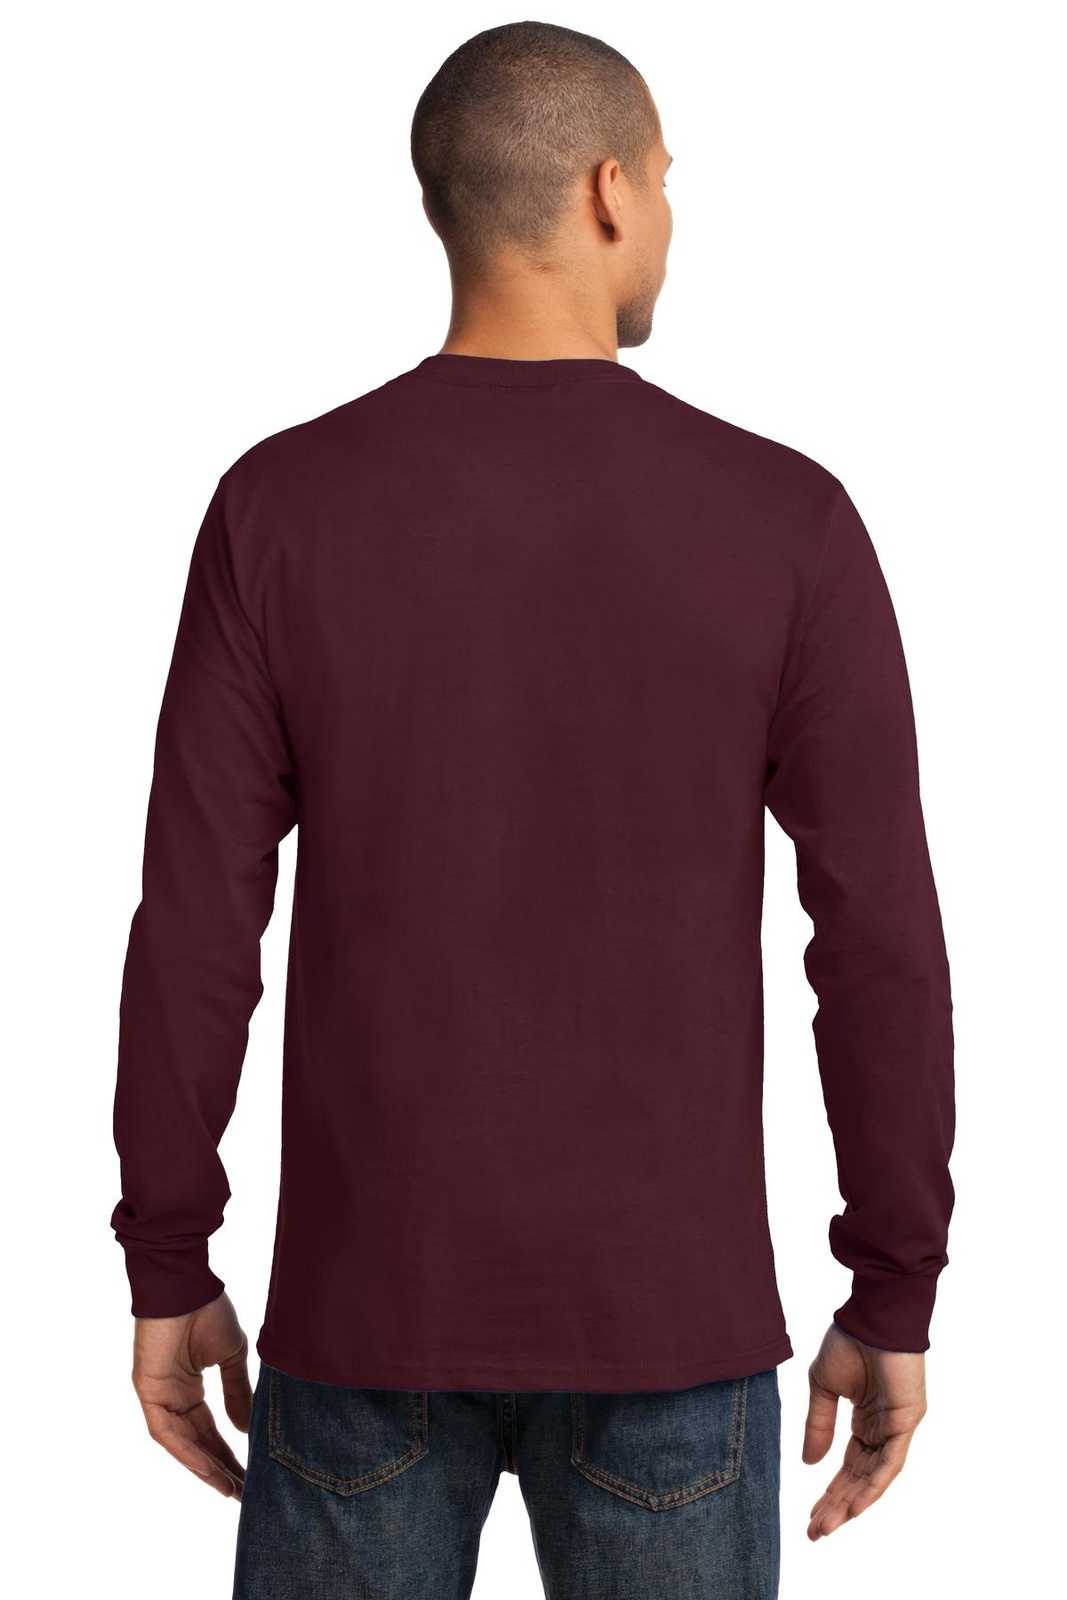 Port & Company PC61LS Long Sleeve Essential Tee - Athletic Maroon - HIT a Double - 1